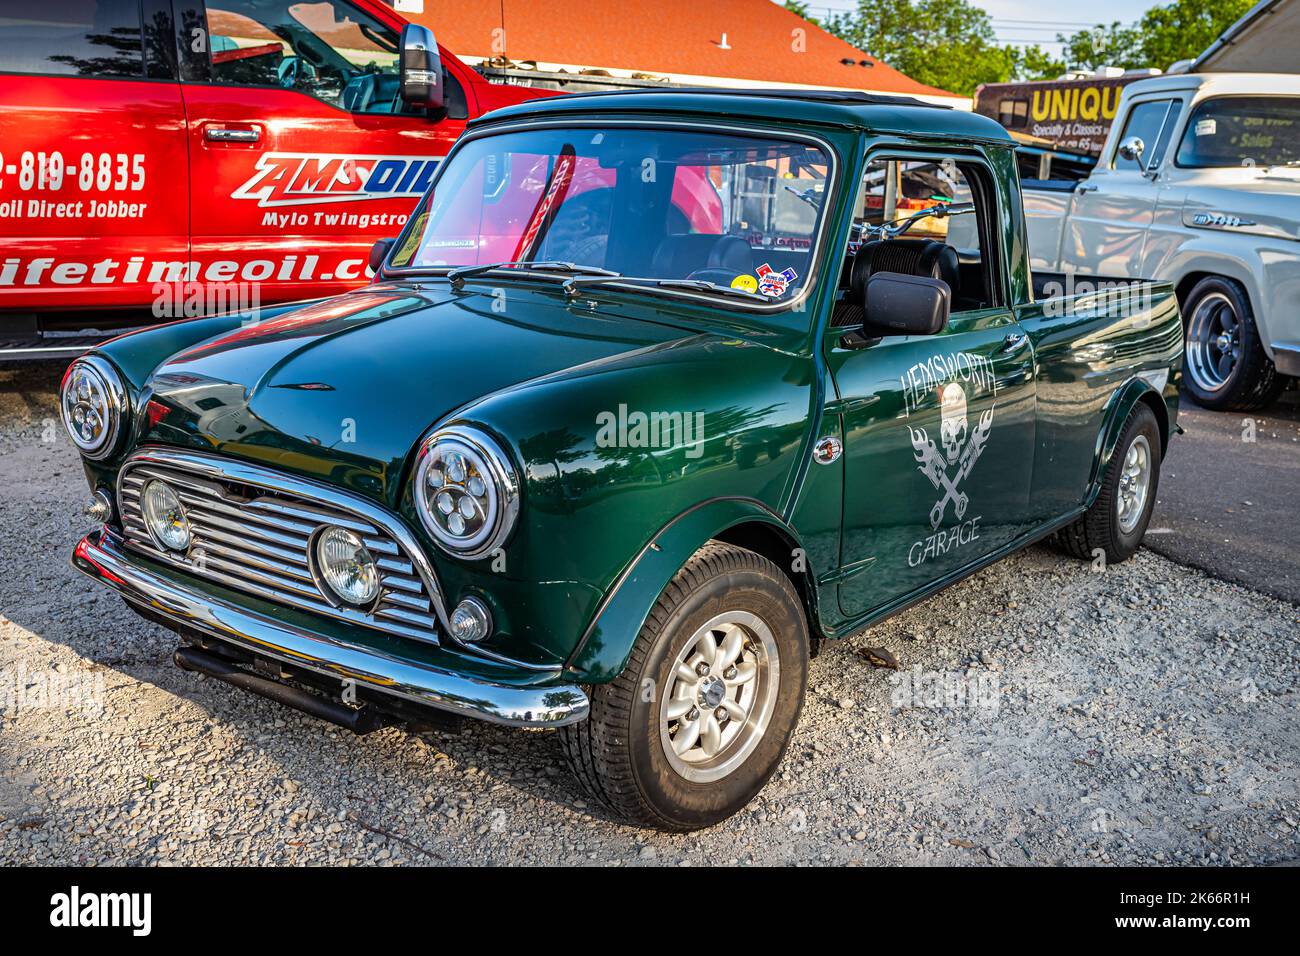 Falcon Heights, MN - June 19, 2022: High perspective front corner view of a 1964 Austin Mini Pickup Truck at a local car show. Stock Photo